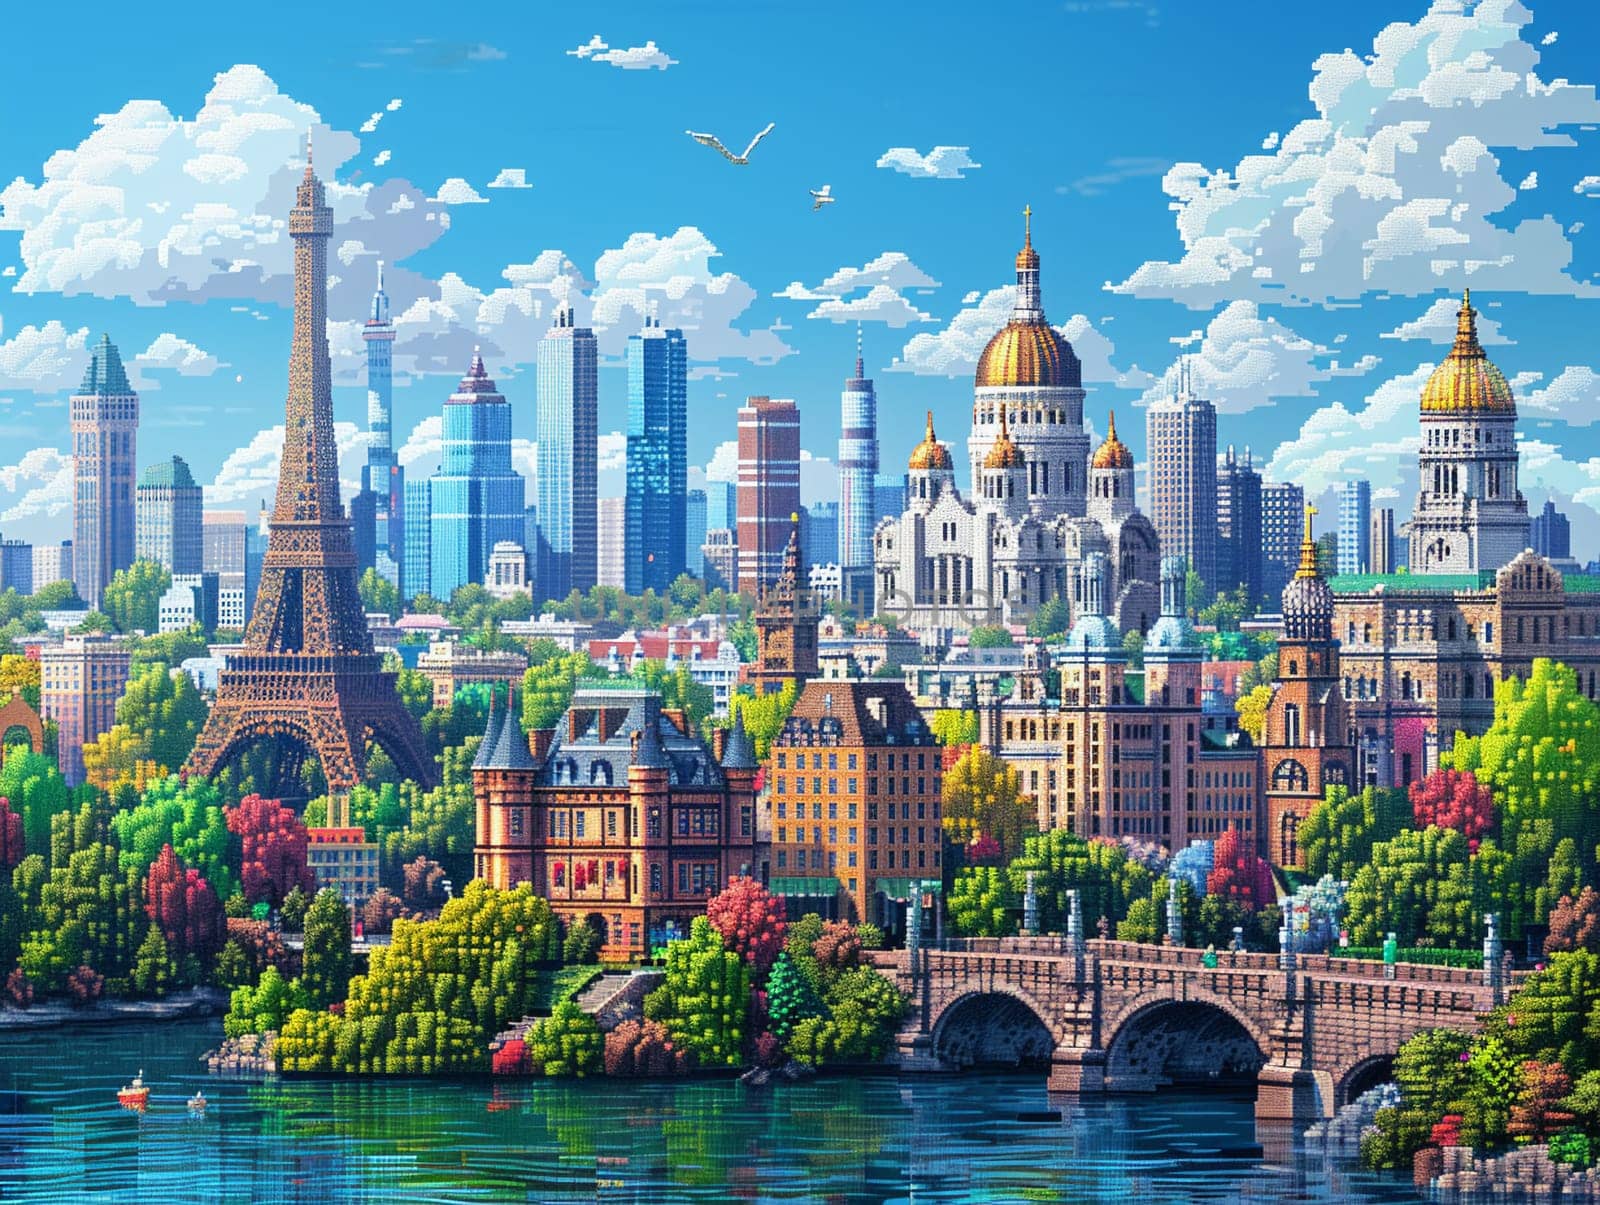 Pixelated World Landmarks for a Global Travel Game, Famous structures reduce to pixels, blurring a pixel tourist's bucket list.